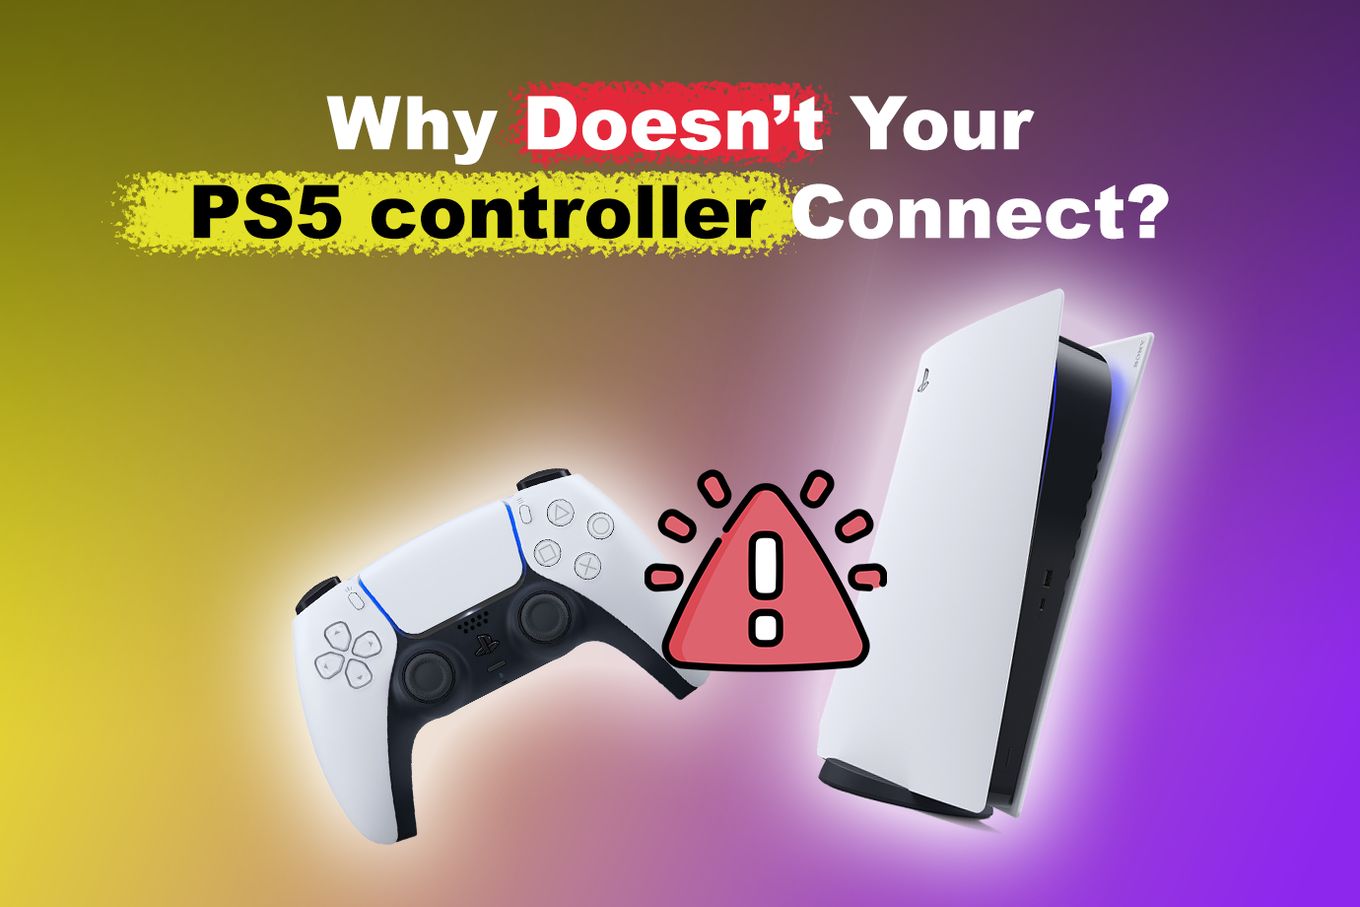 Why PS5 Controller Doesn’t Connect